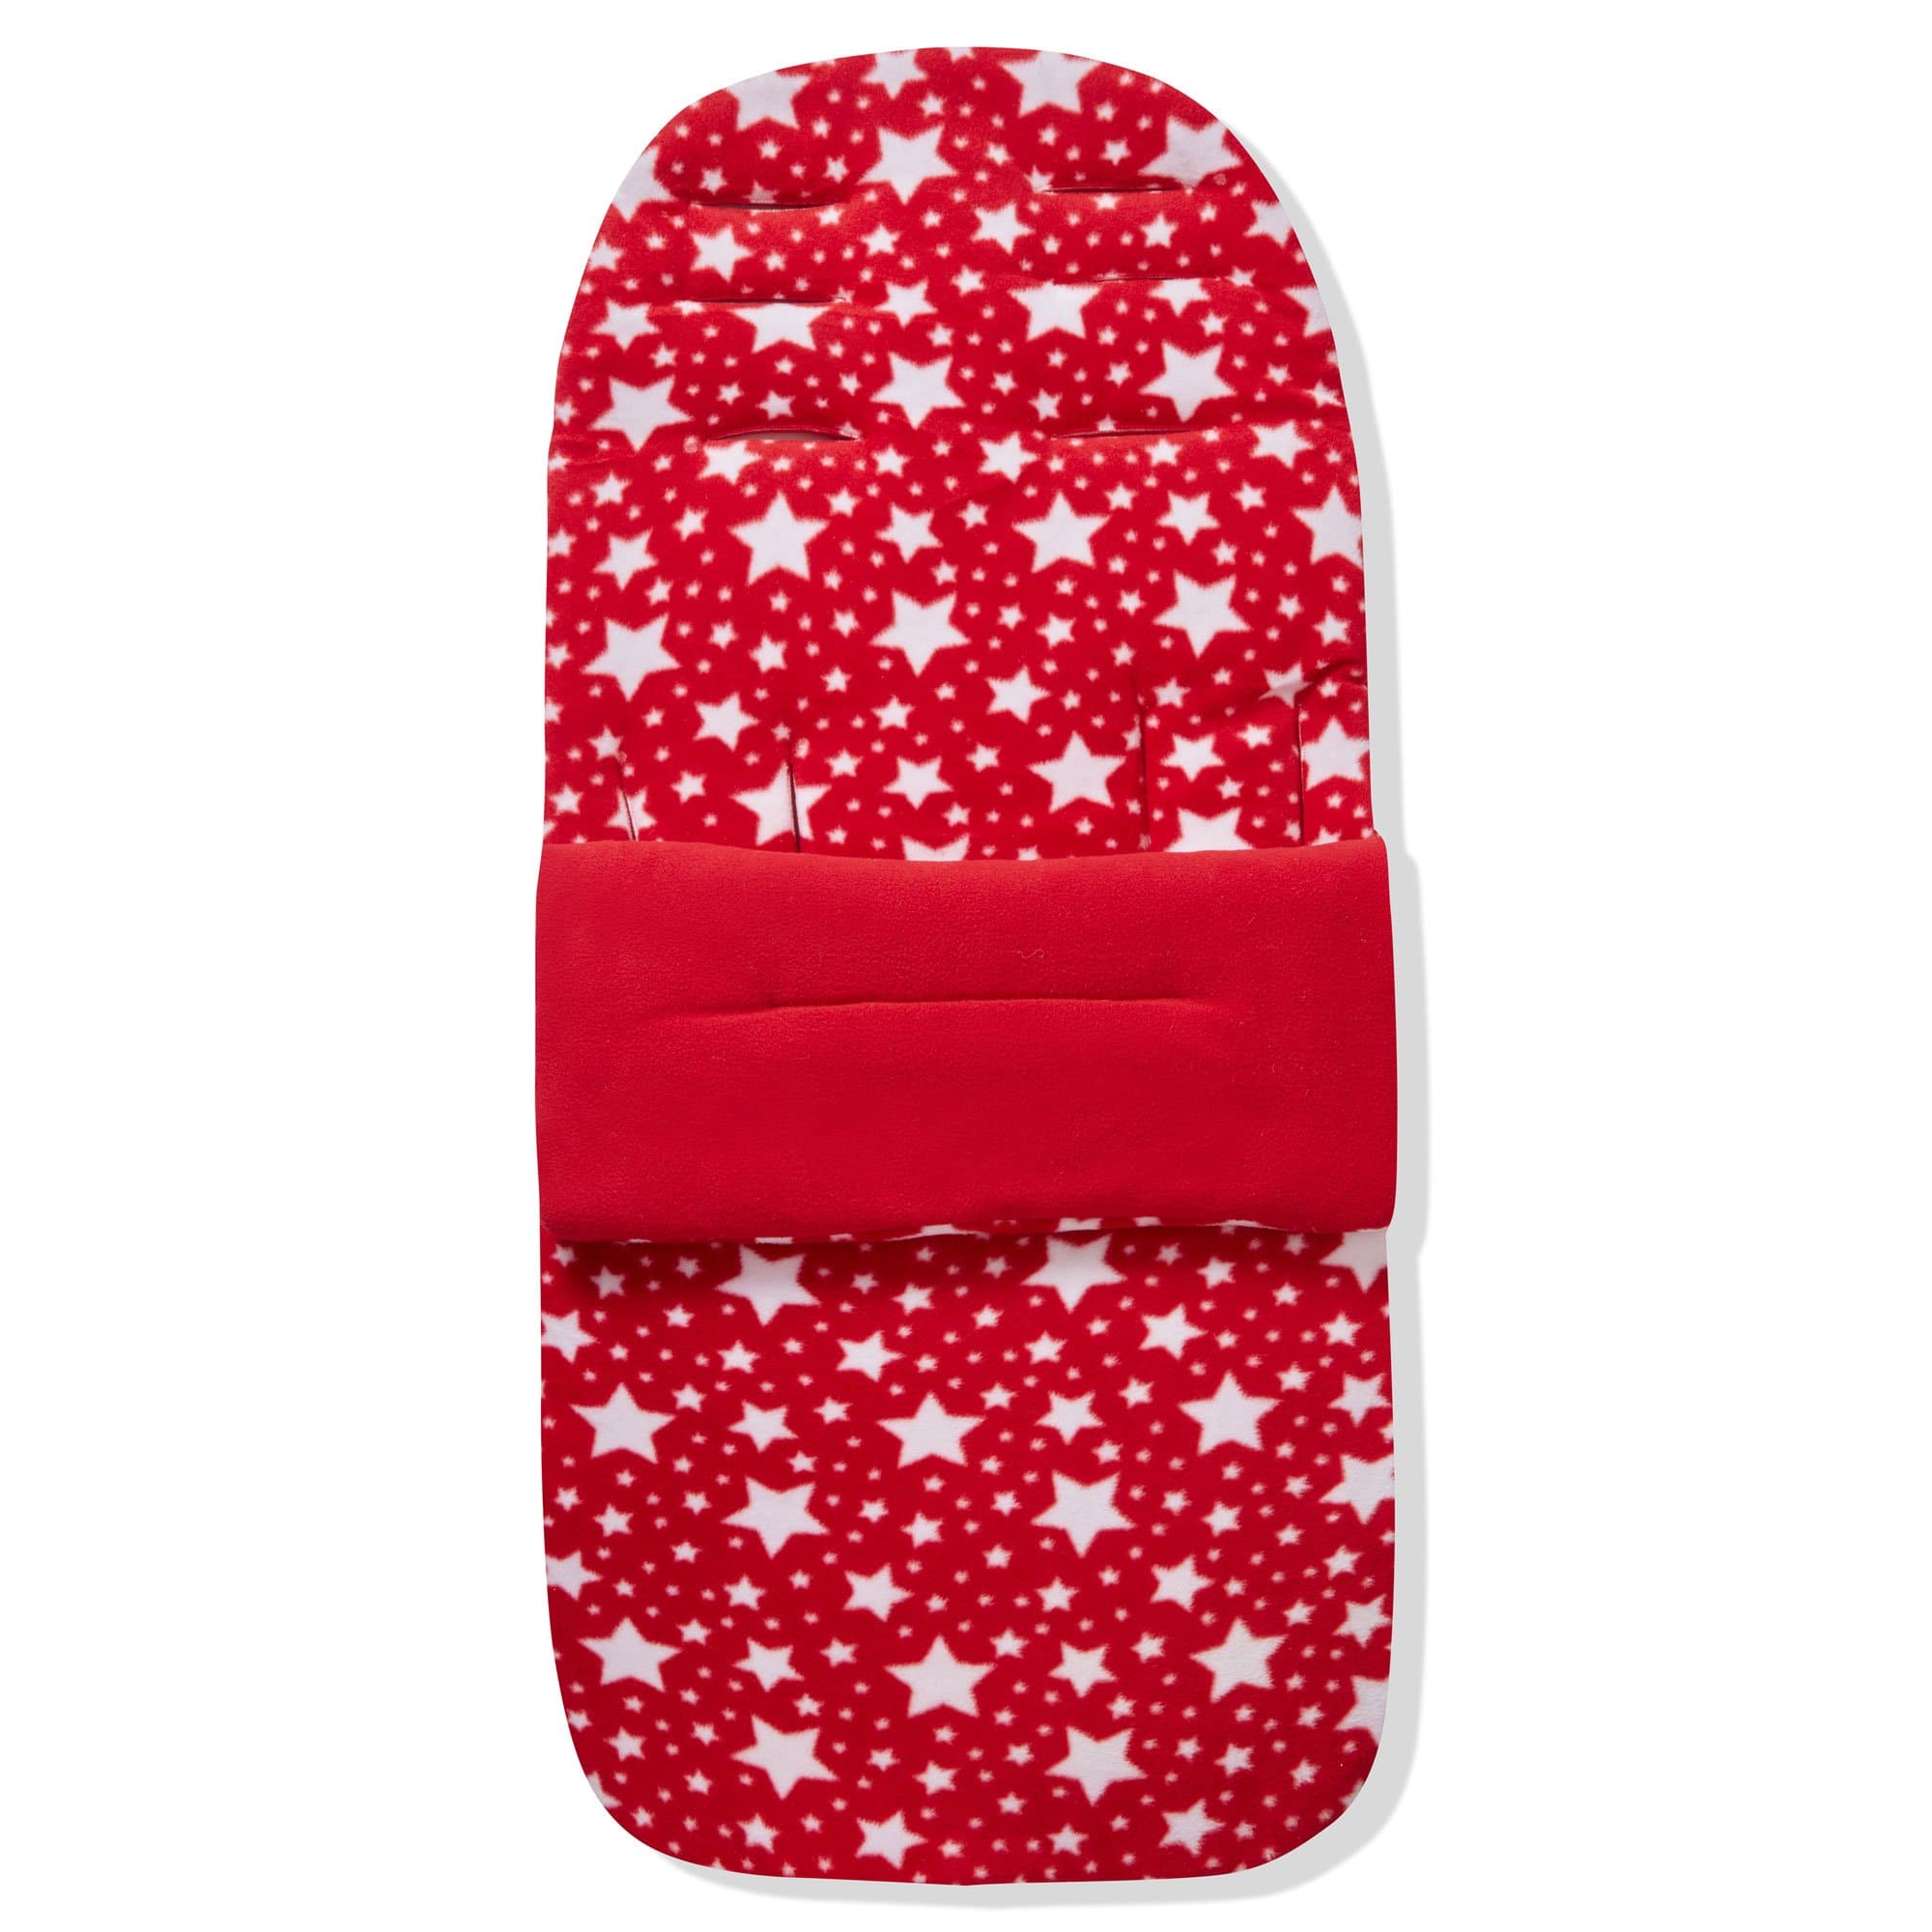 Fleece Footmuff / Cosy Toes Compatible with Stokke - Red Star / Fits All Models | For Your Little One